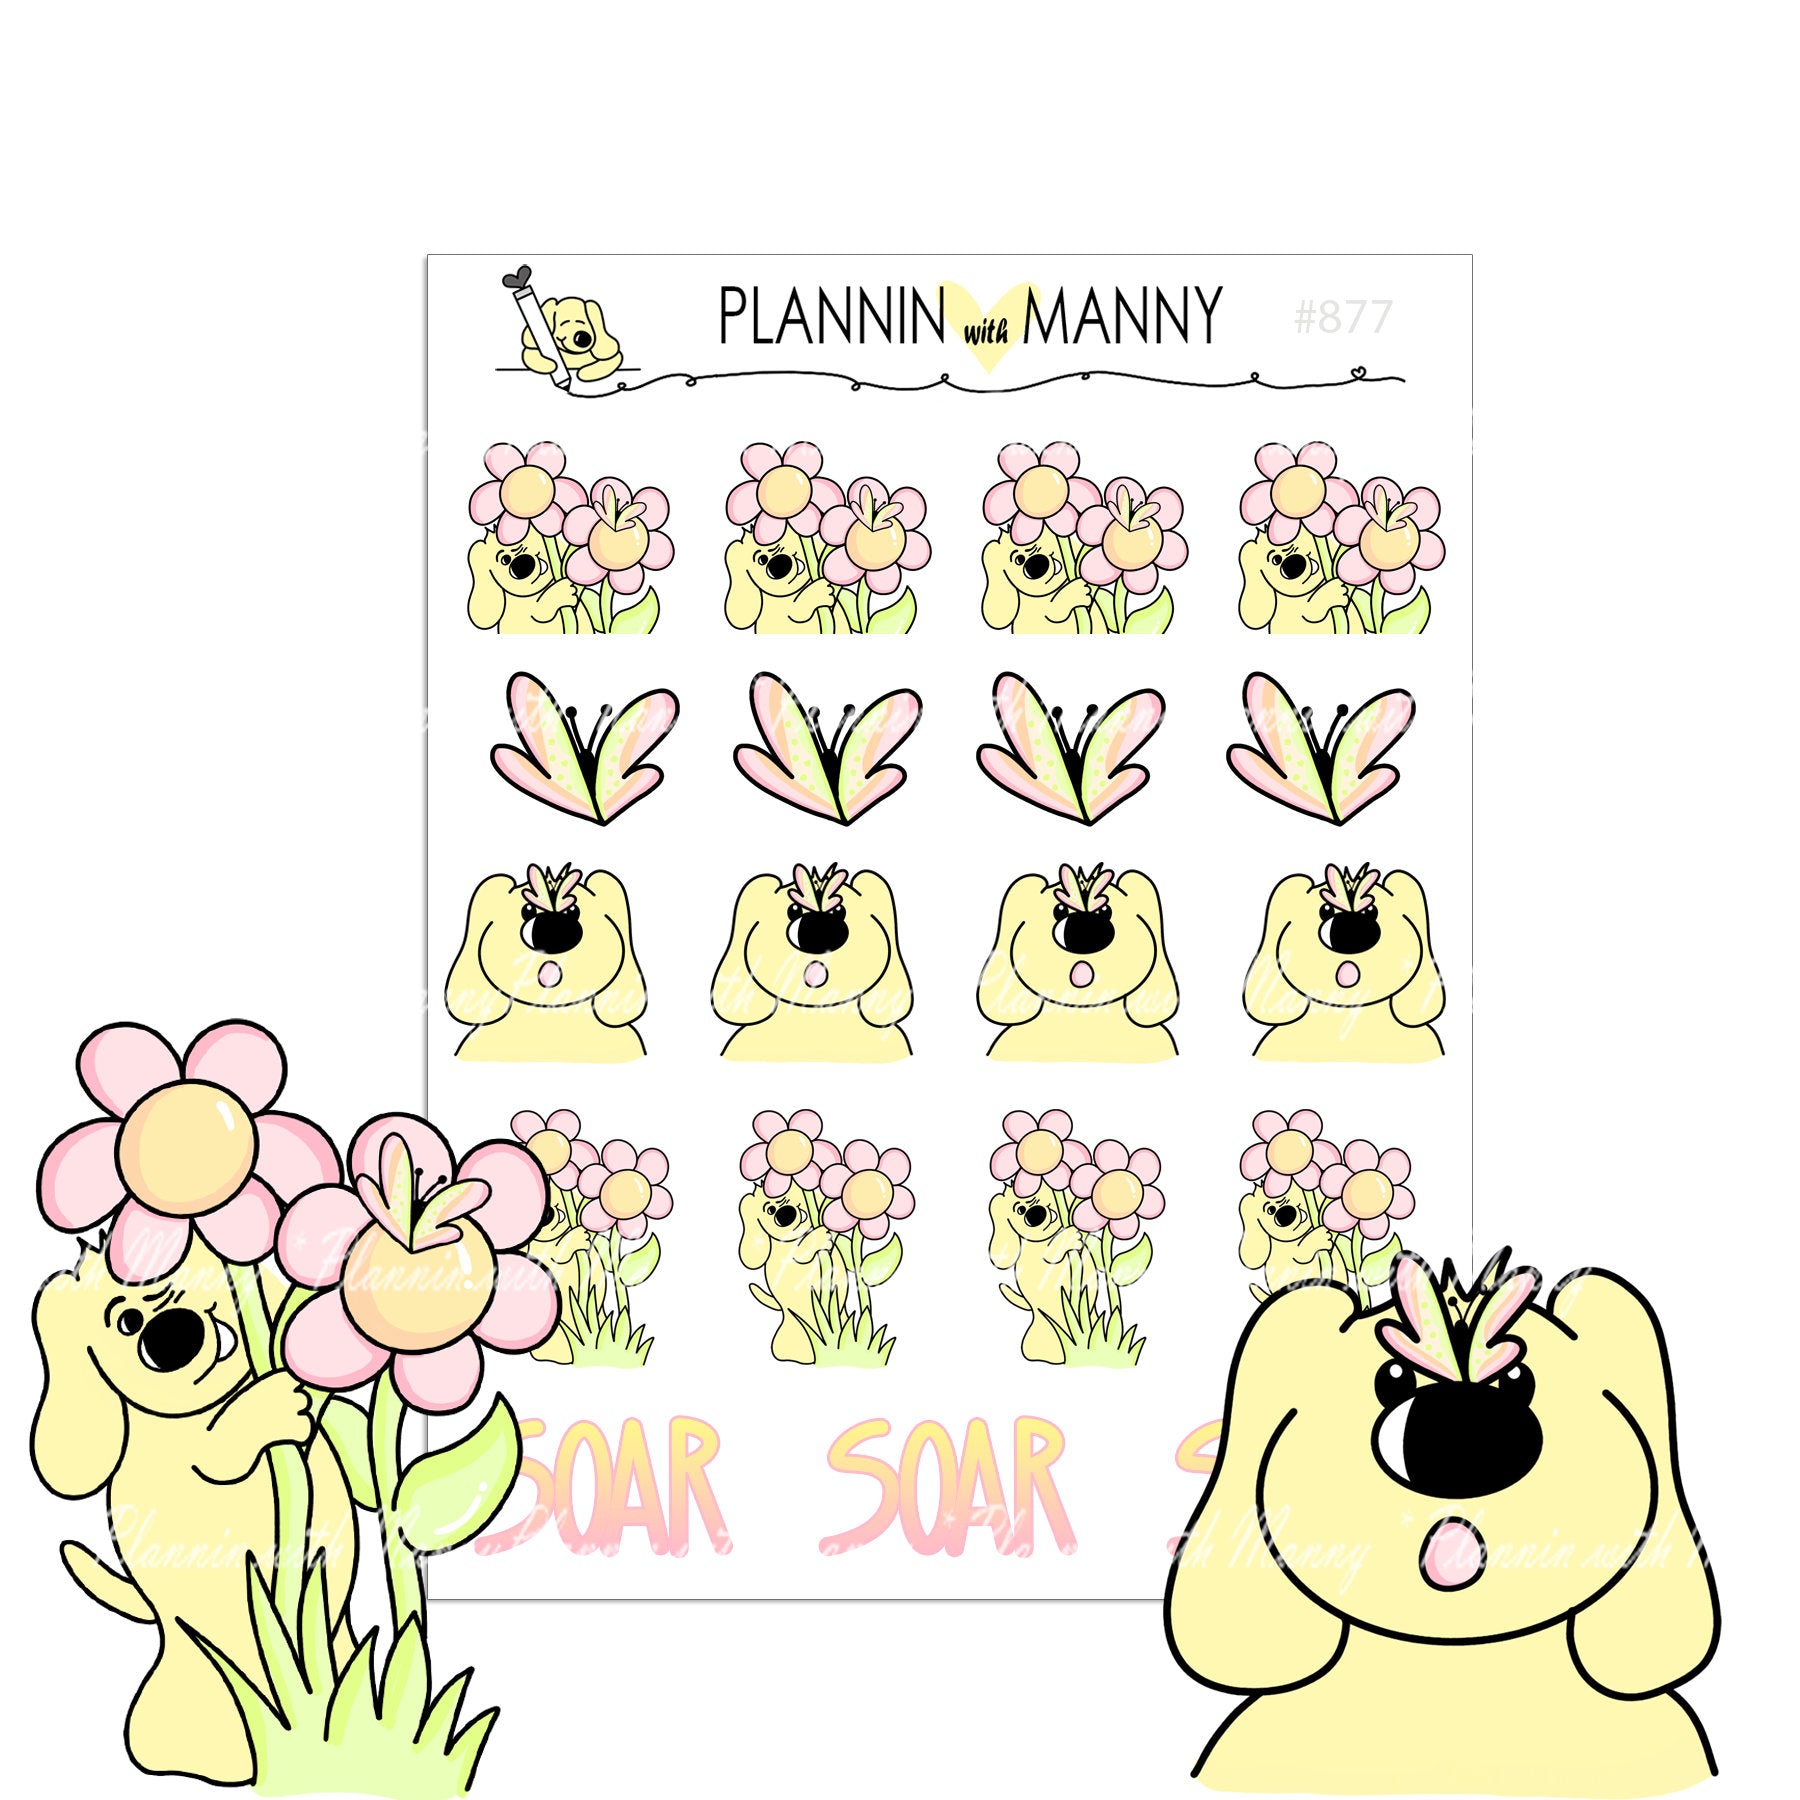 877 Butterfly Kisses Characters and Deco Planner Stickers